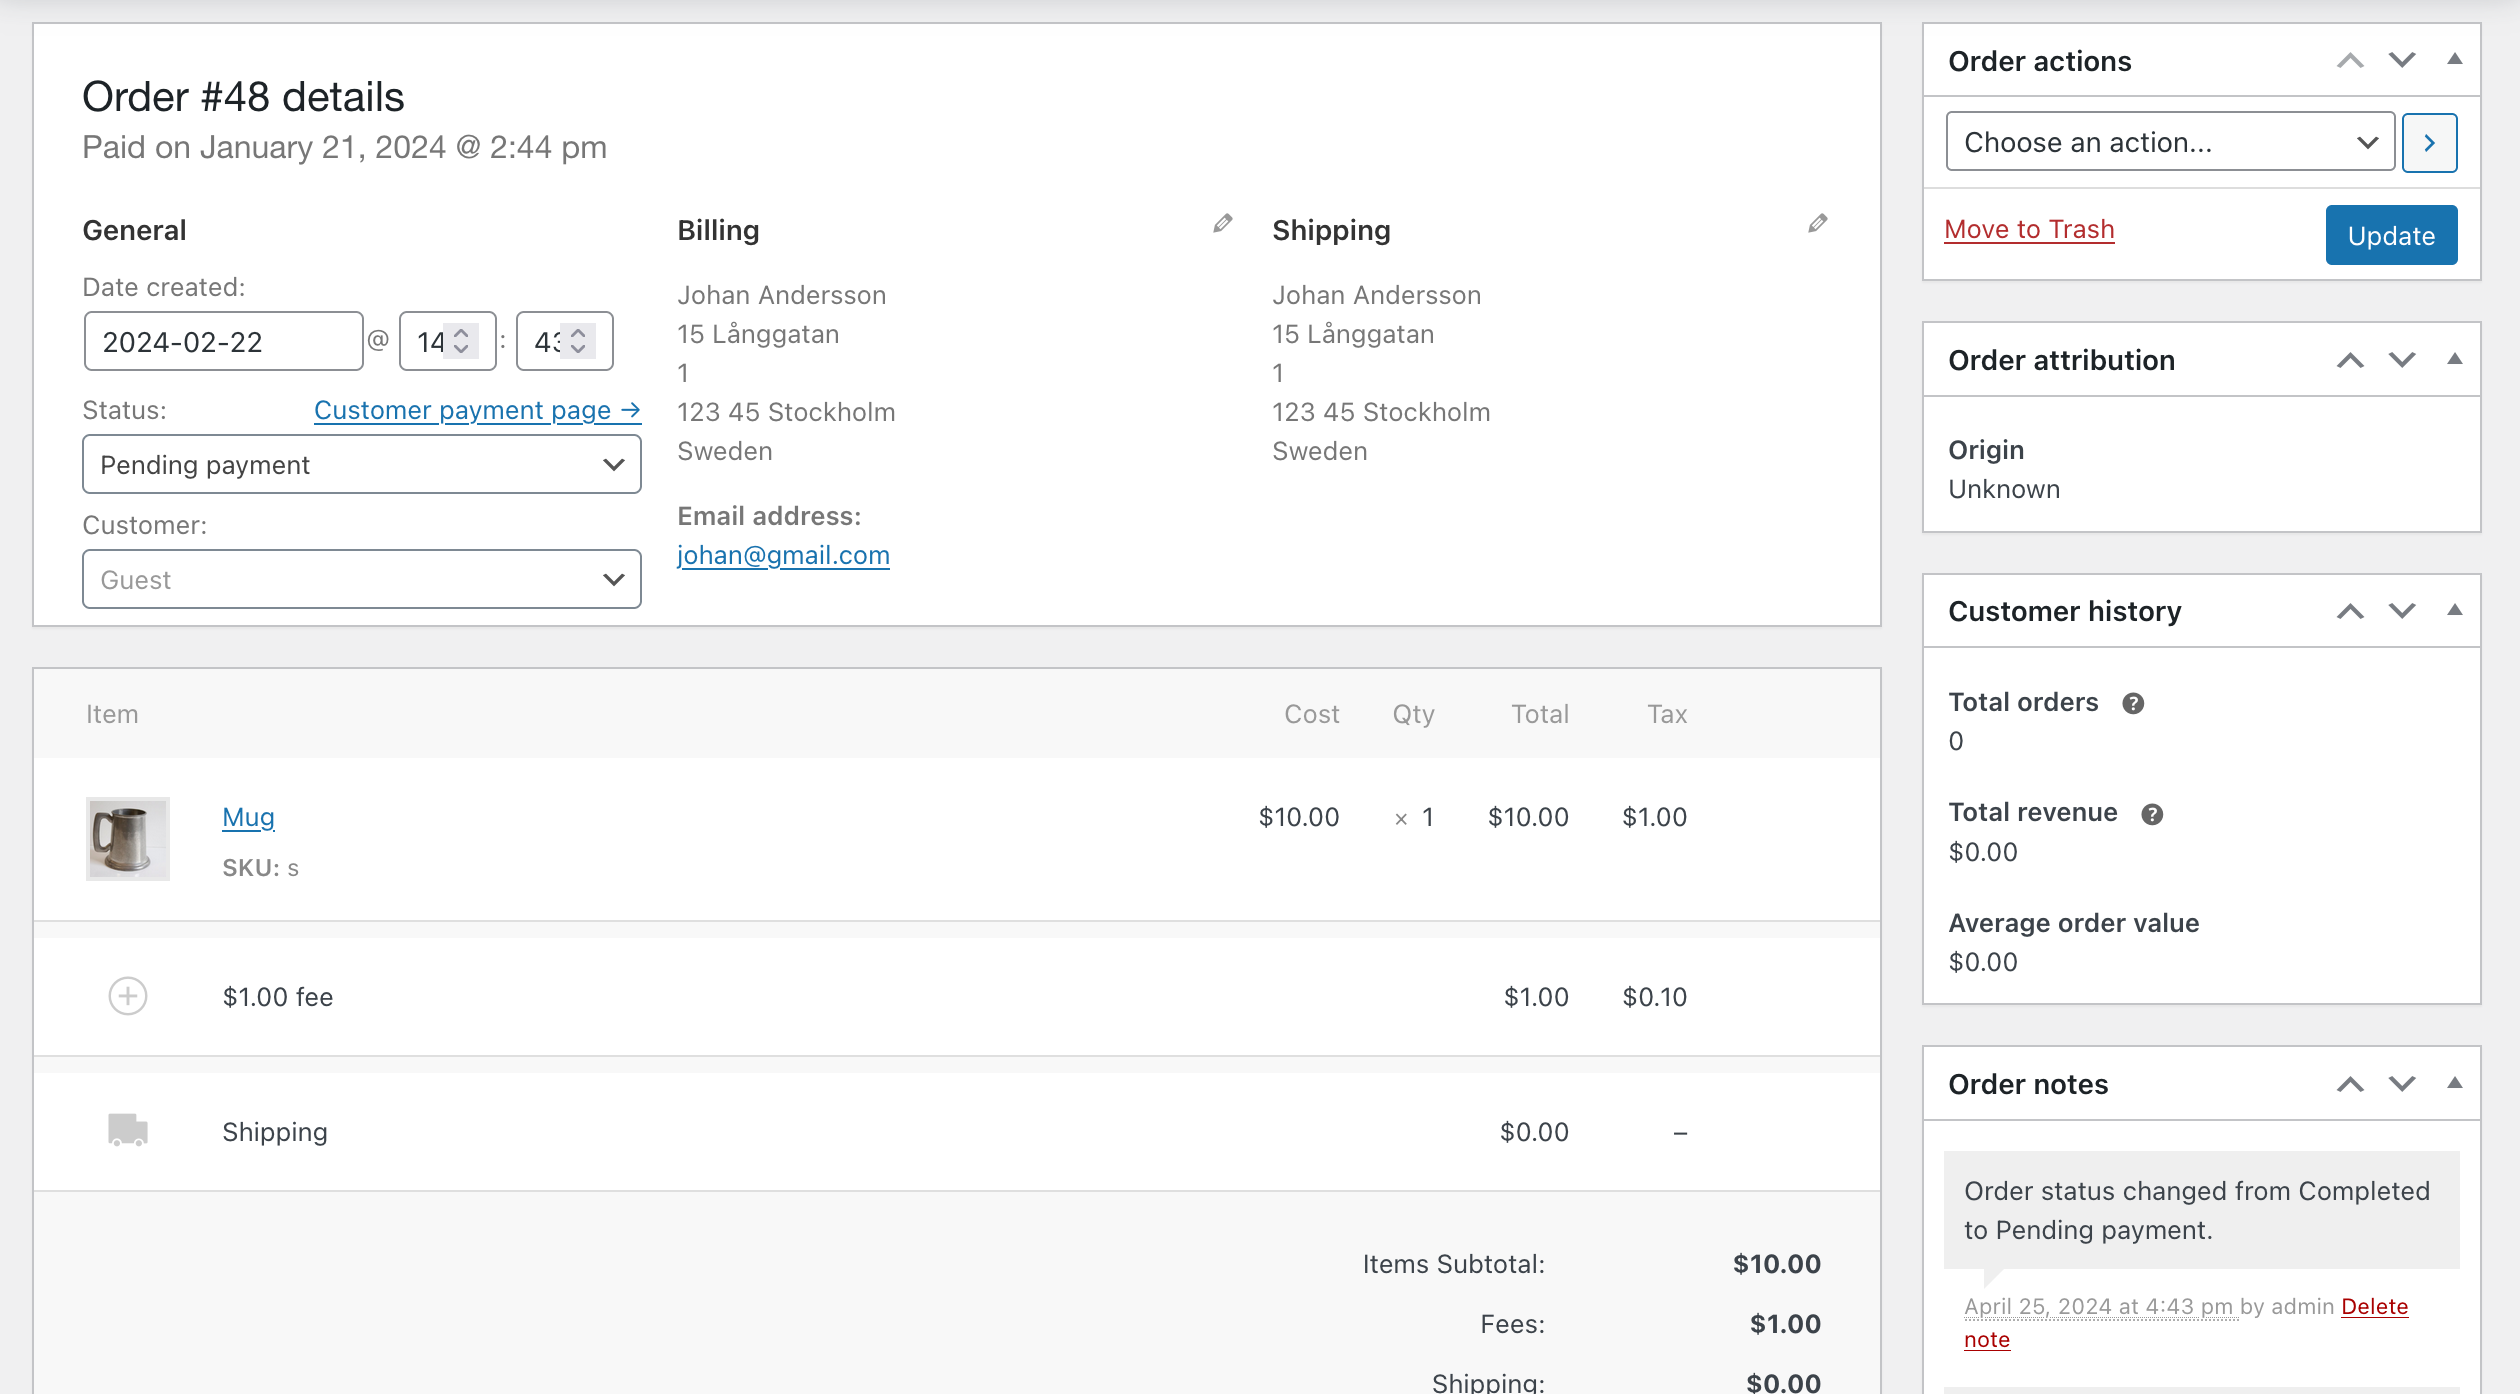 Screenshot of the WooCommerce order edit page without Dashify turned on. The overall style and layout is not as visually appealing.